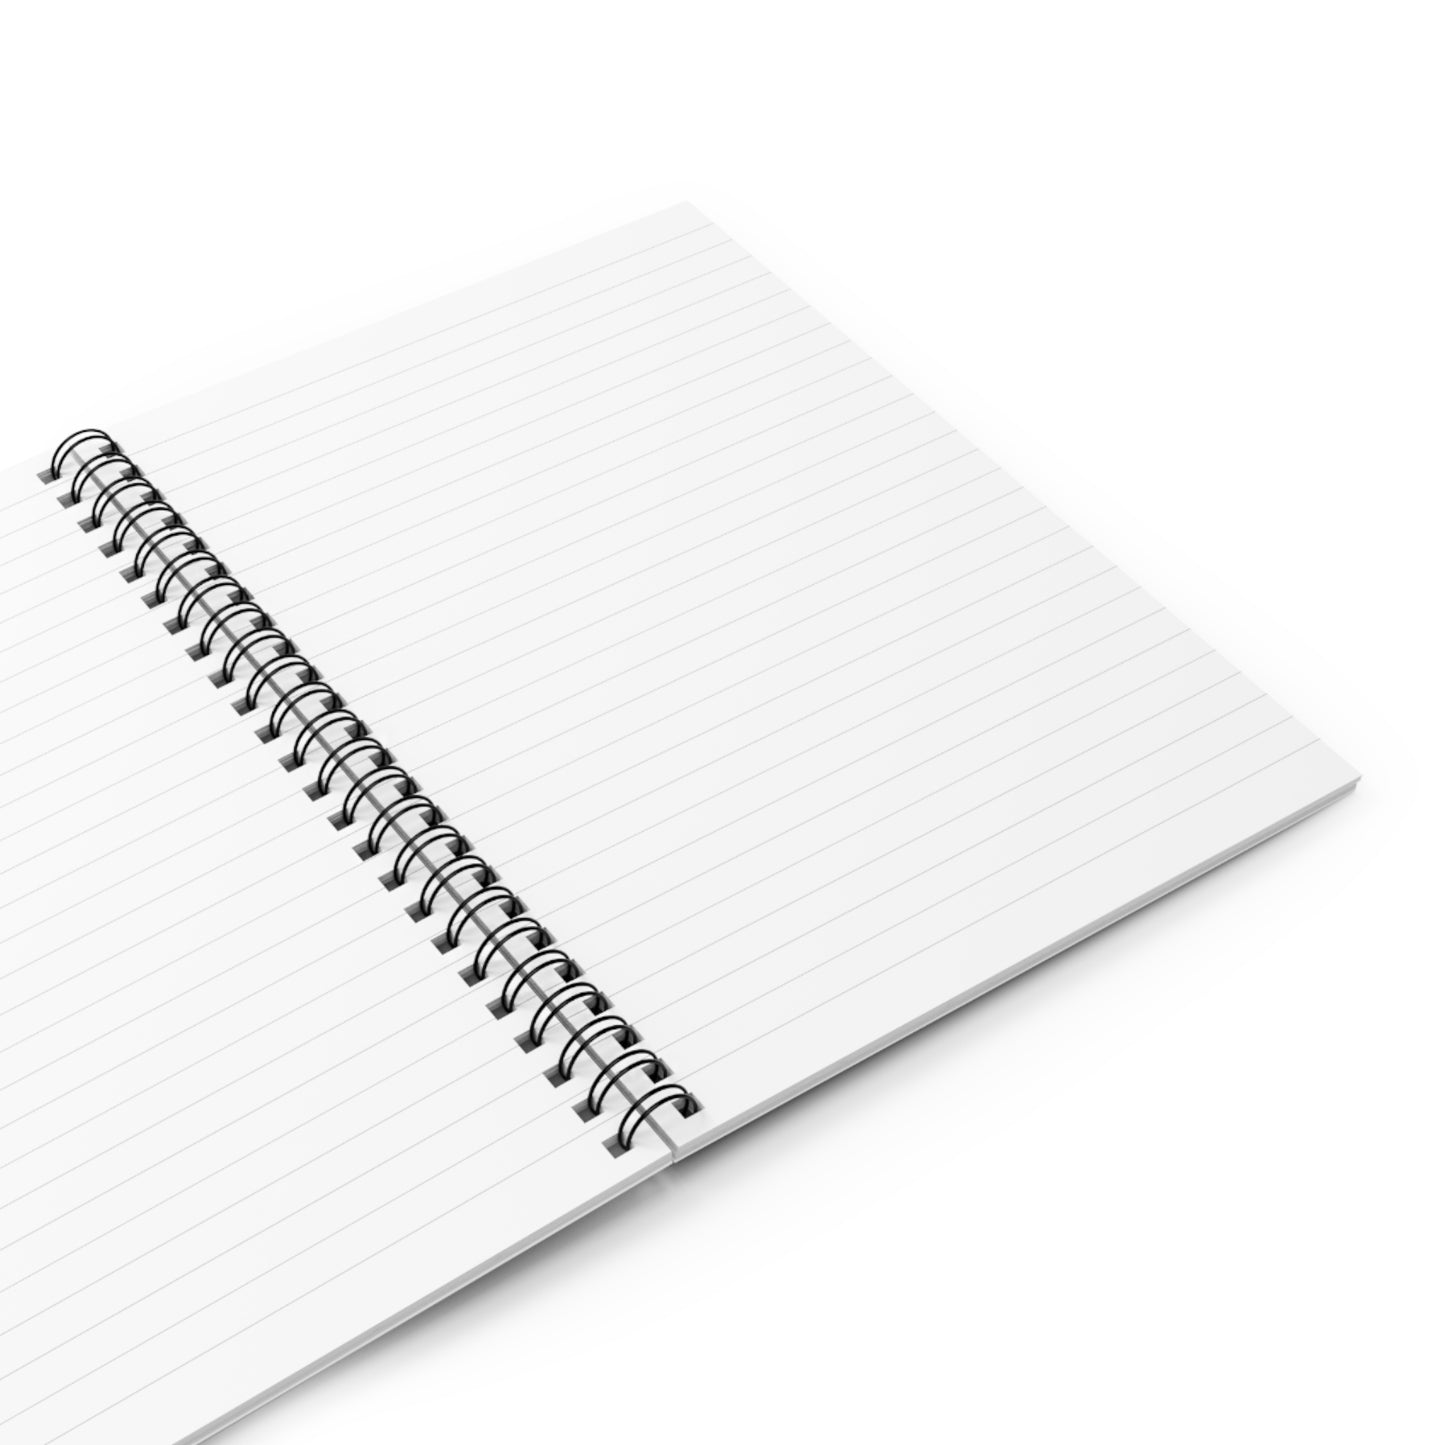 Abstract Wave Blank Spiral Notebook - Ruled Line